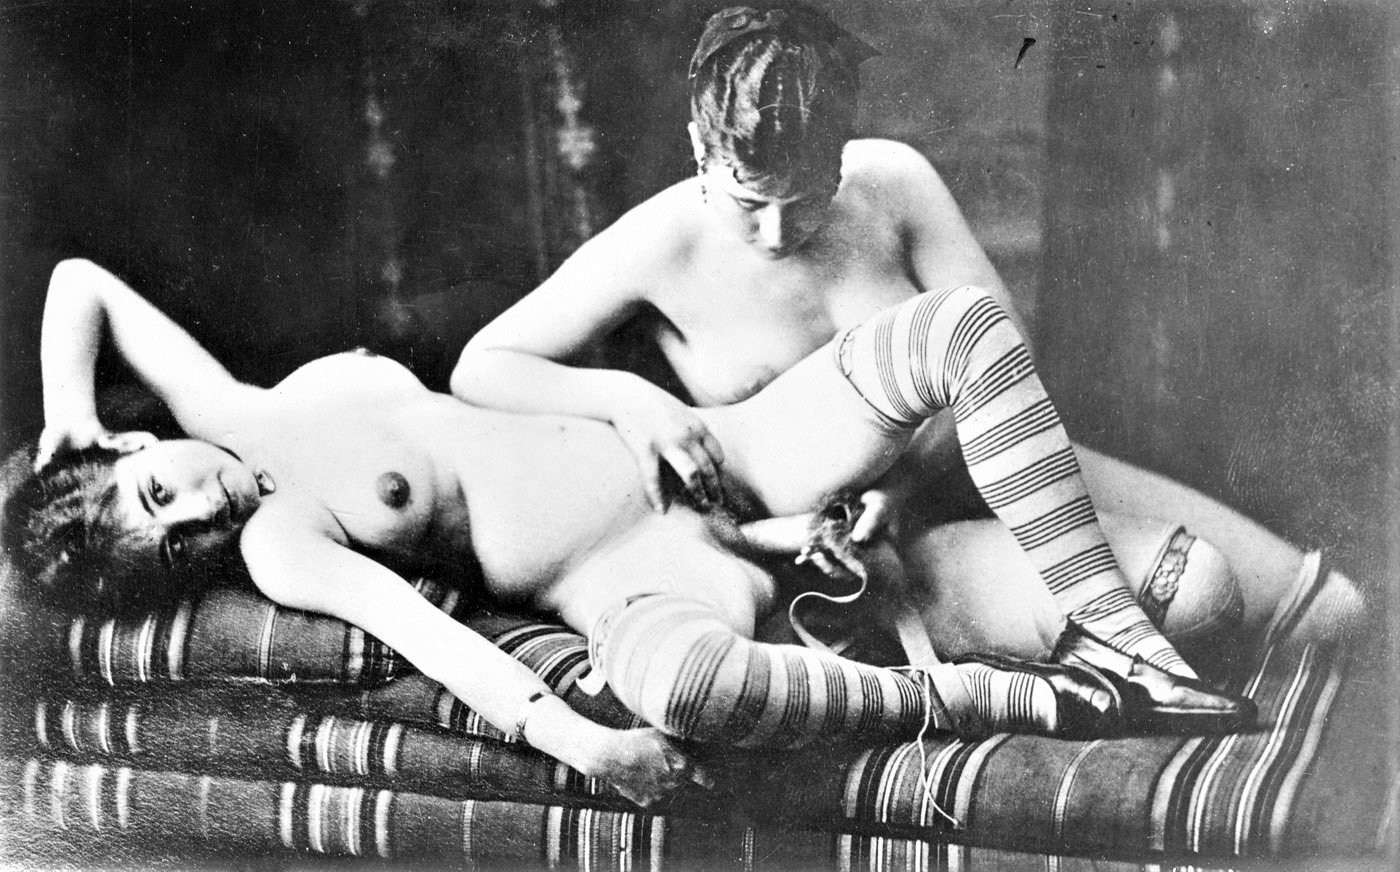 Porn in the 1900